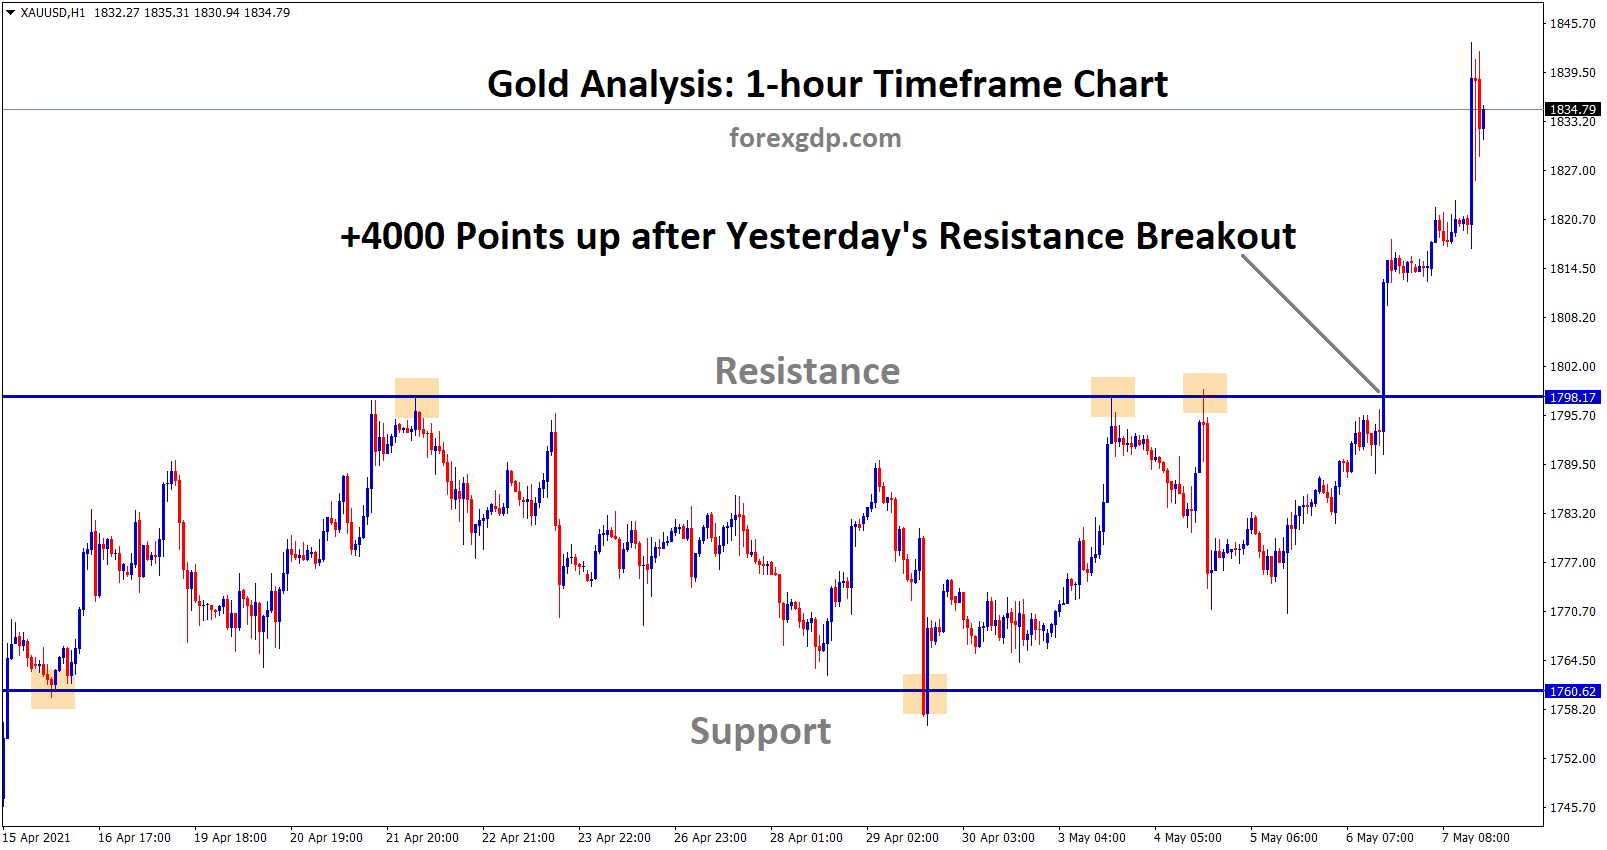 Gold broken the resistance and raised up continuously